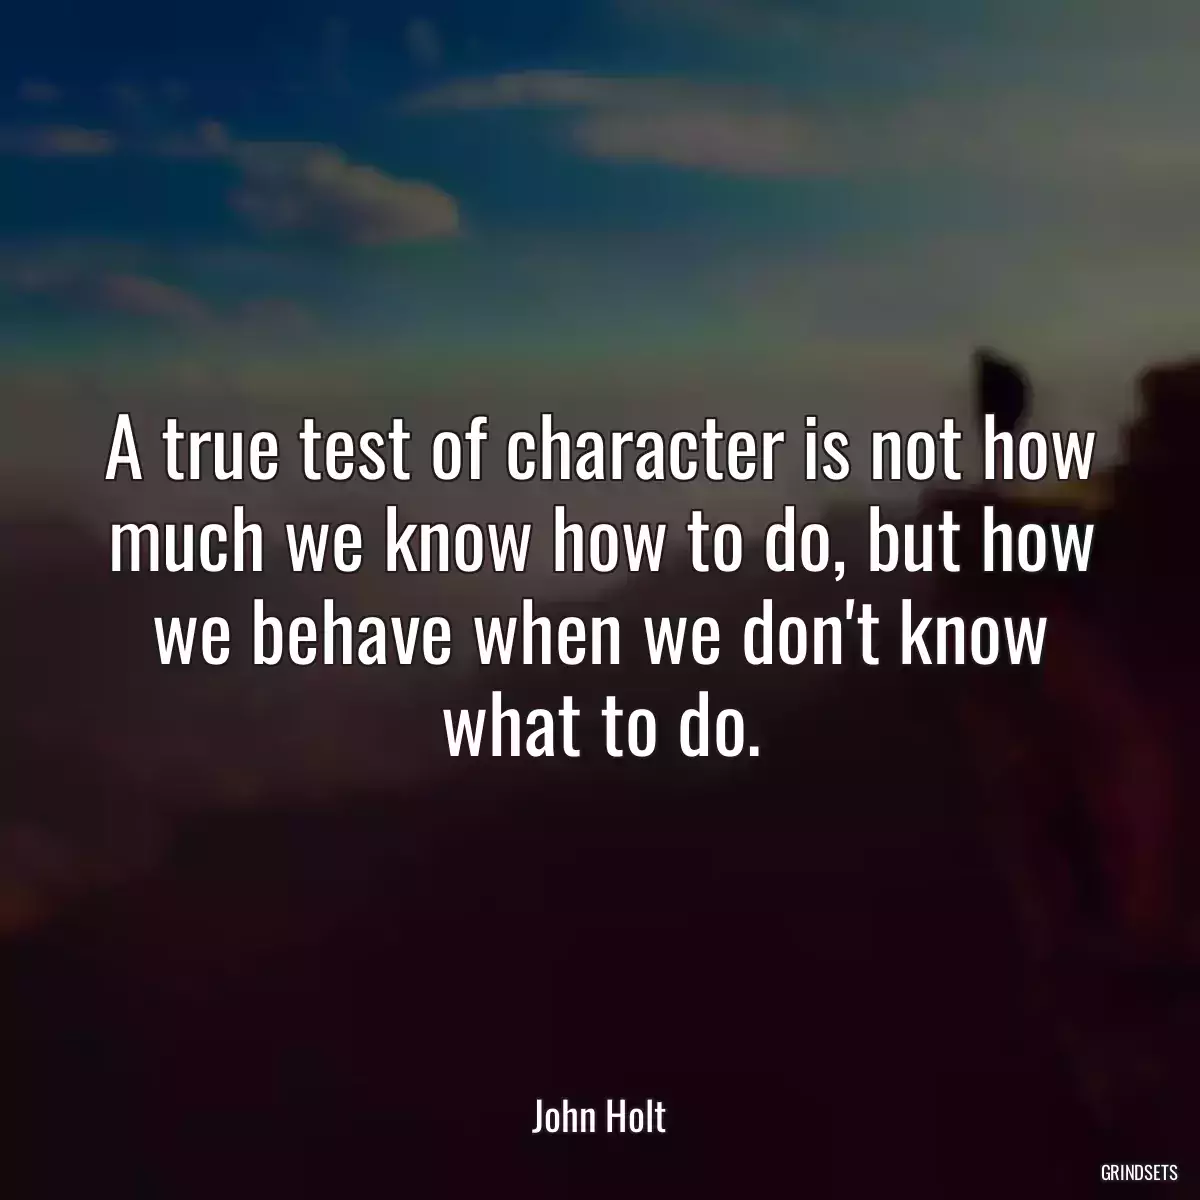 A true test of character is not how much we know how to do, but how we behave when we don\'t know what to do.